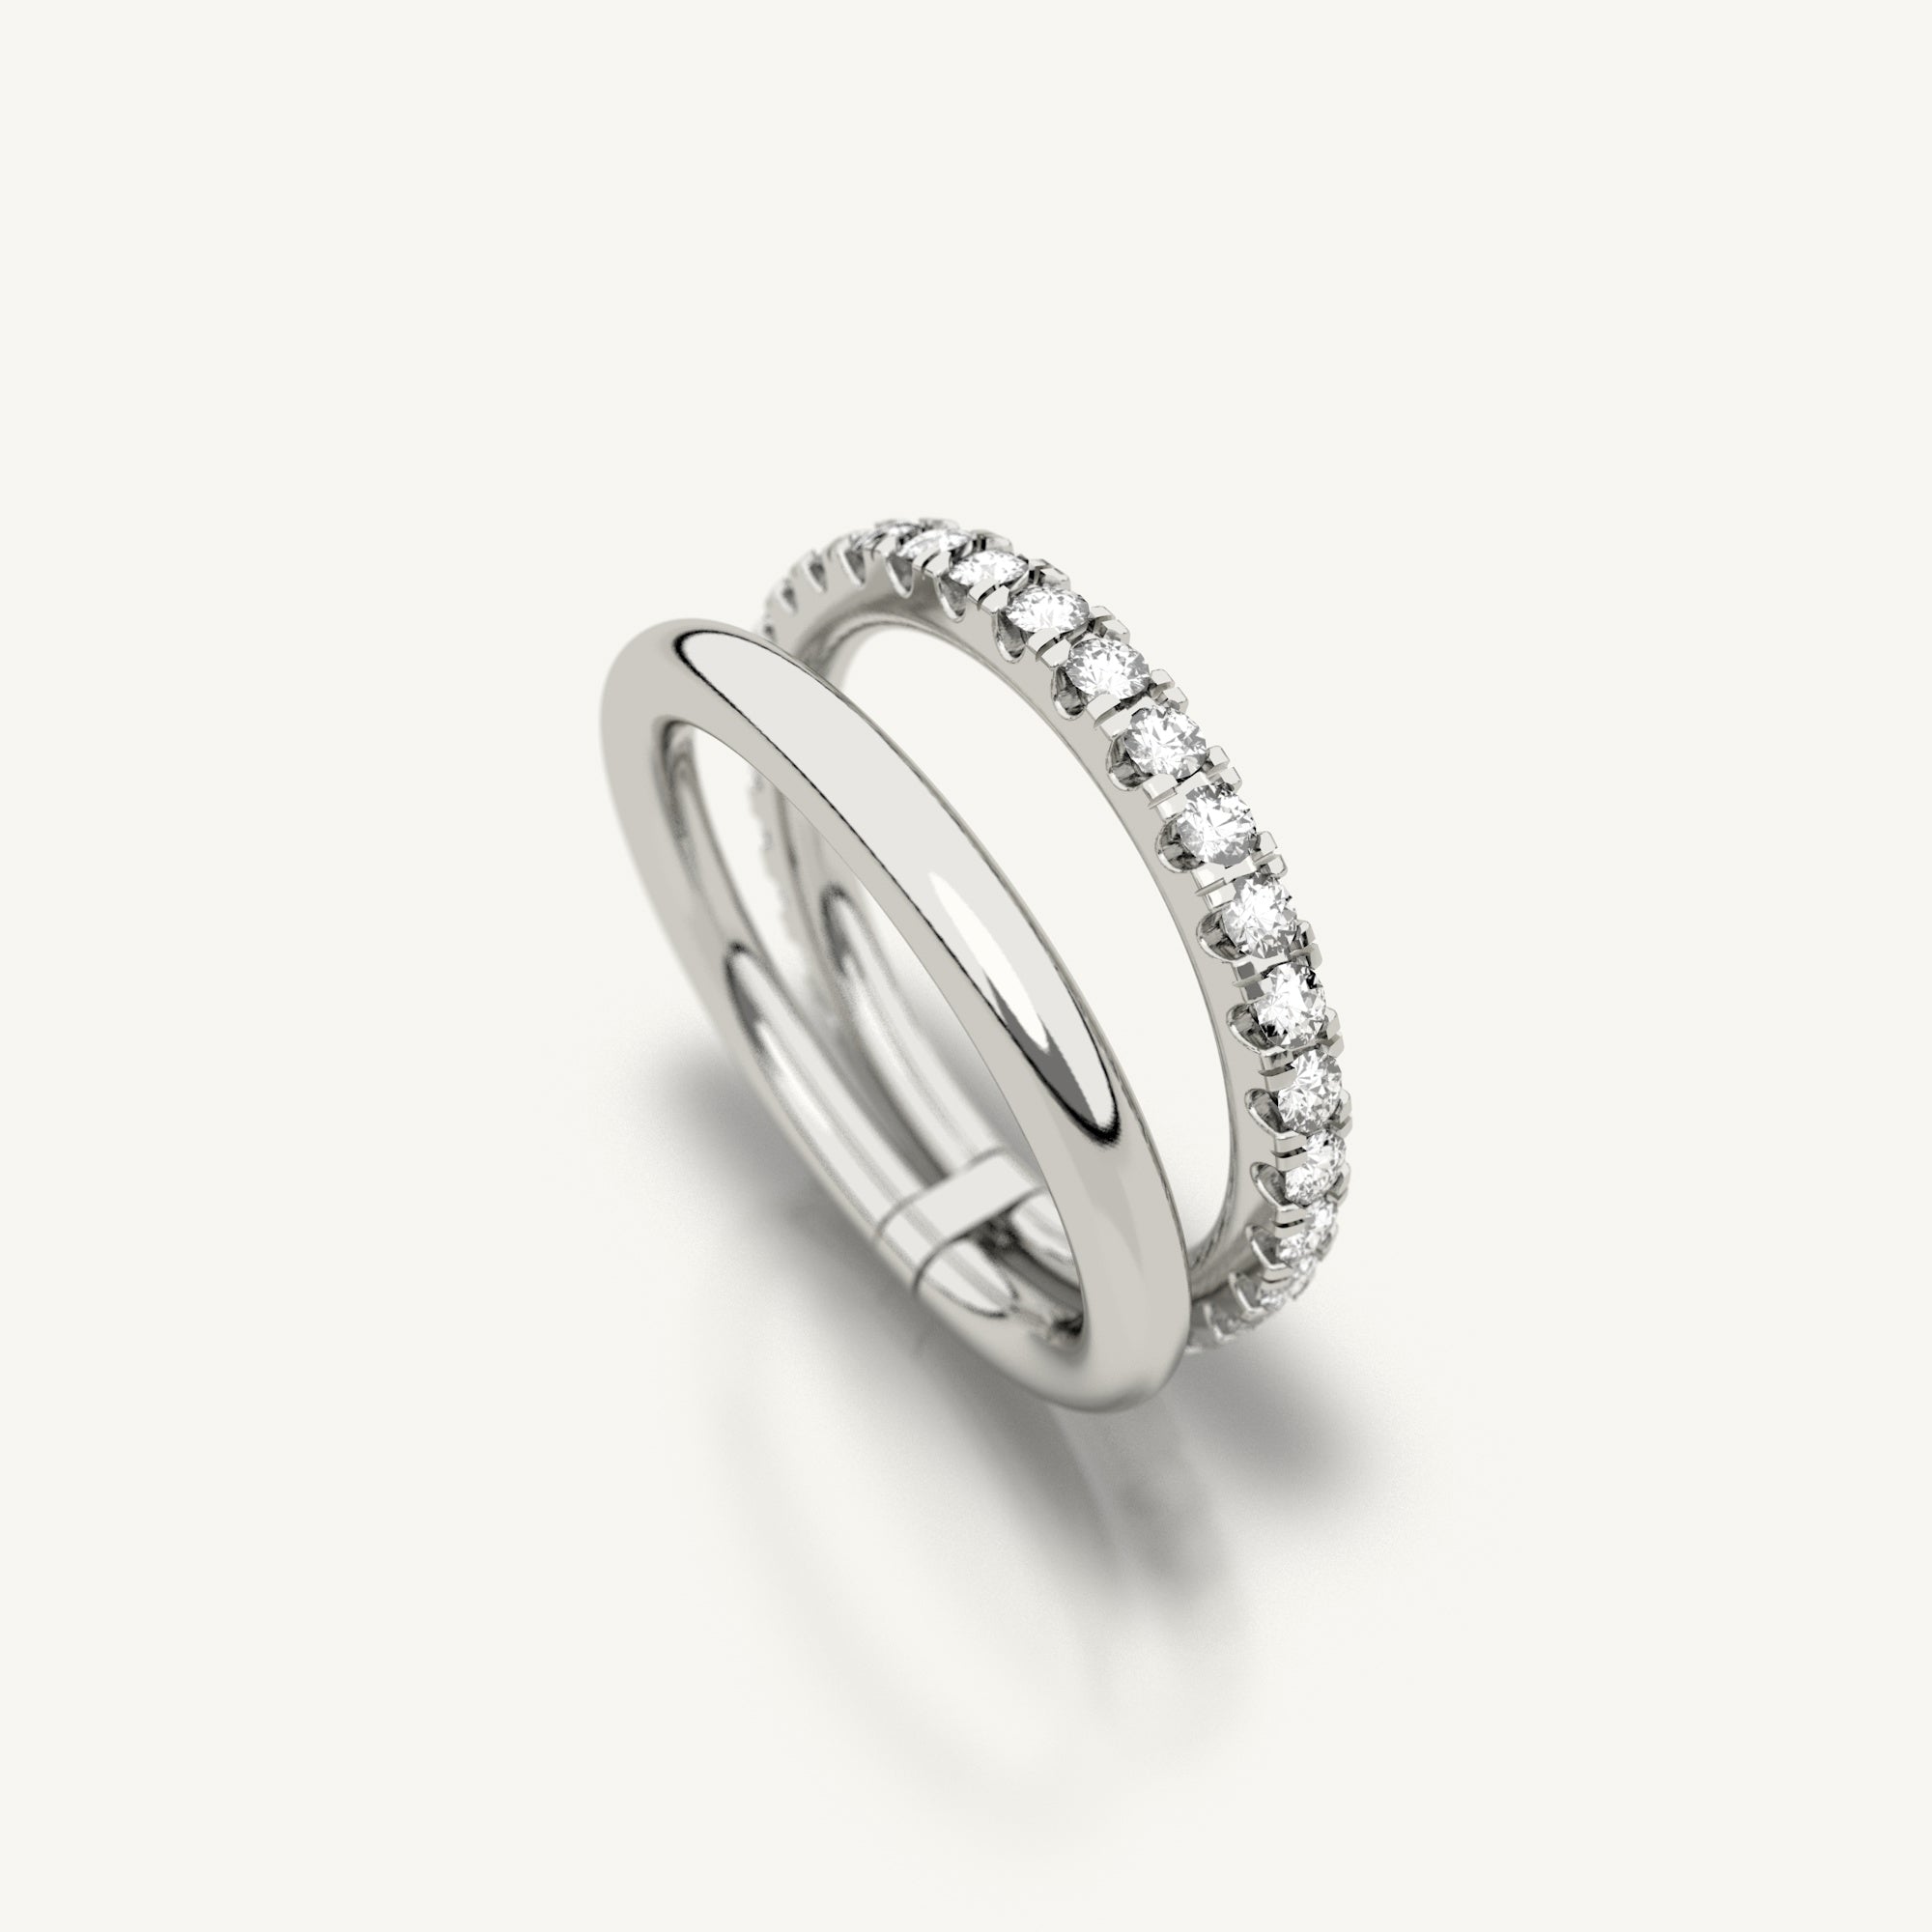 Duo ring from Inacio made from 18k recycled white gold and lab grown diamonds